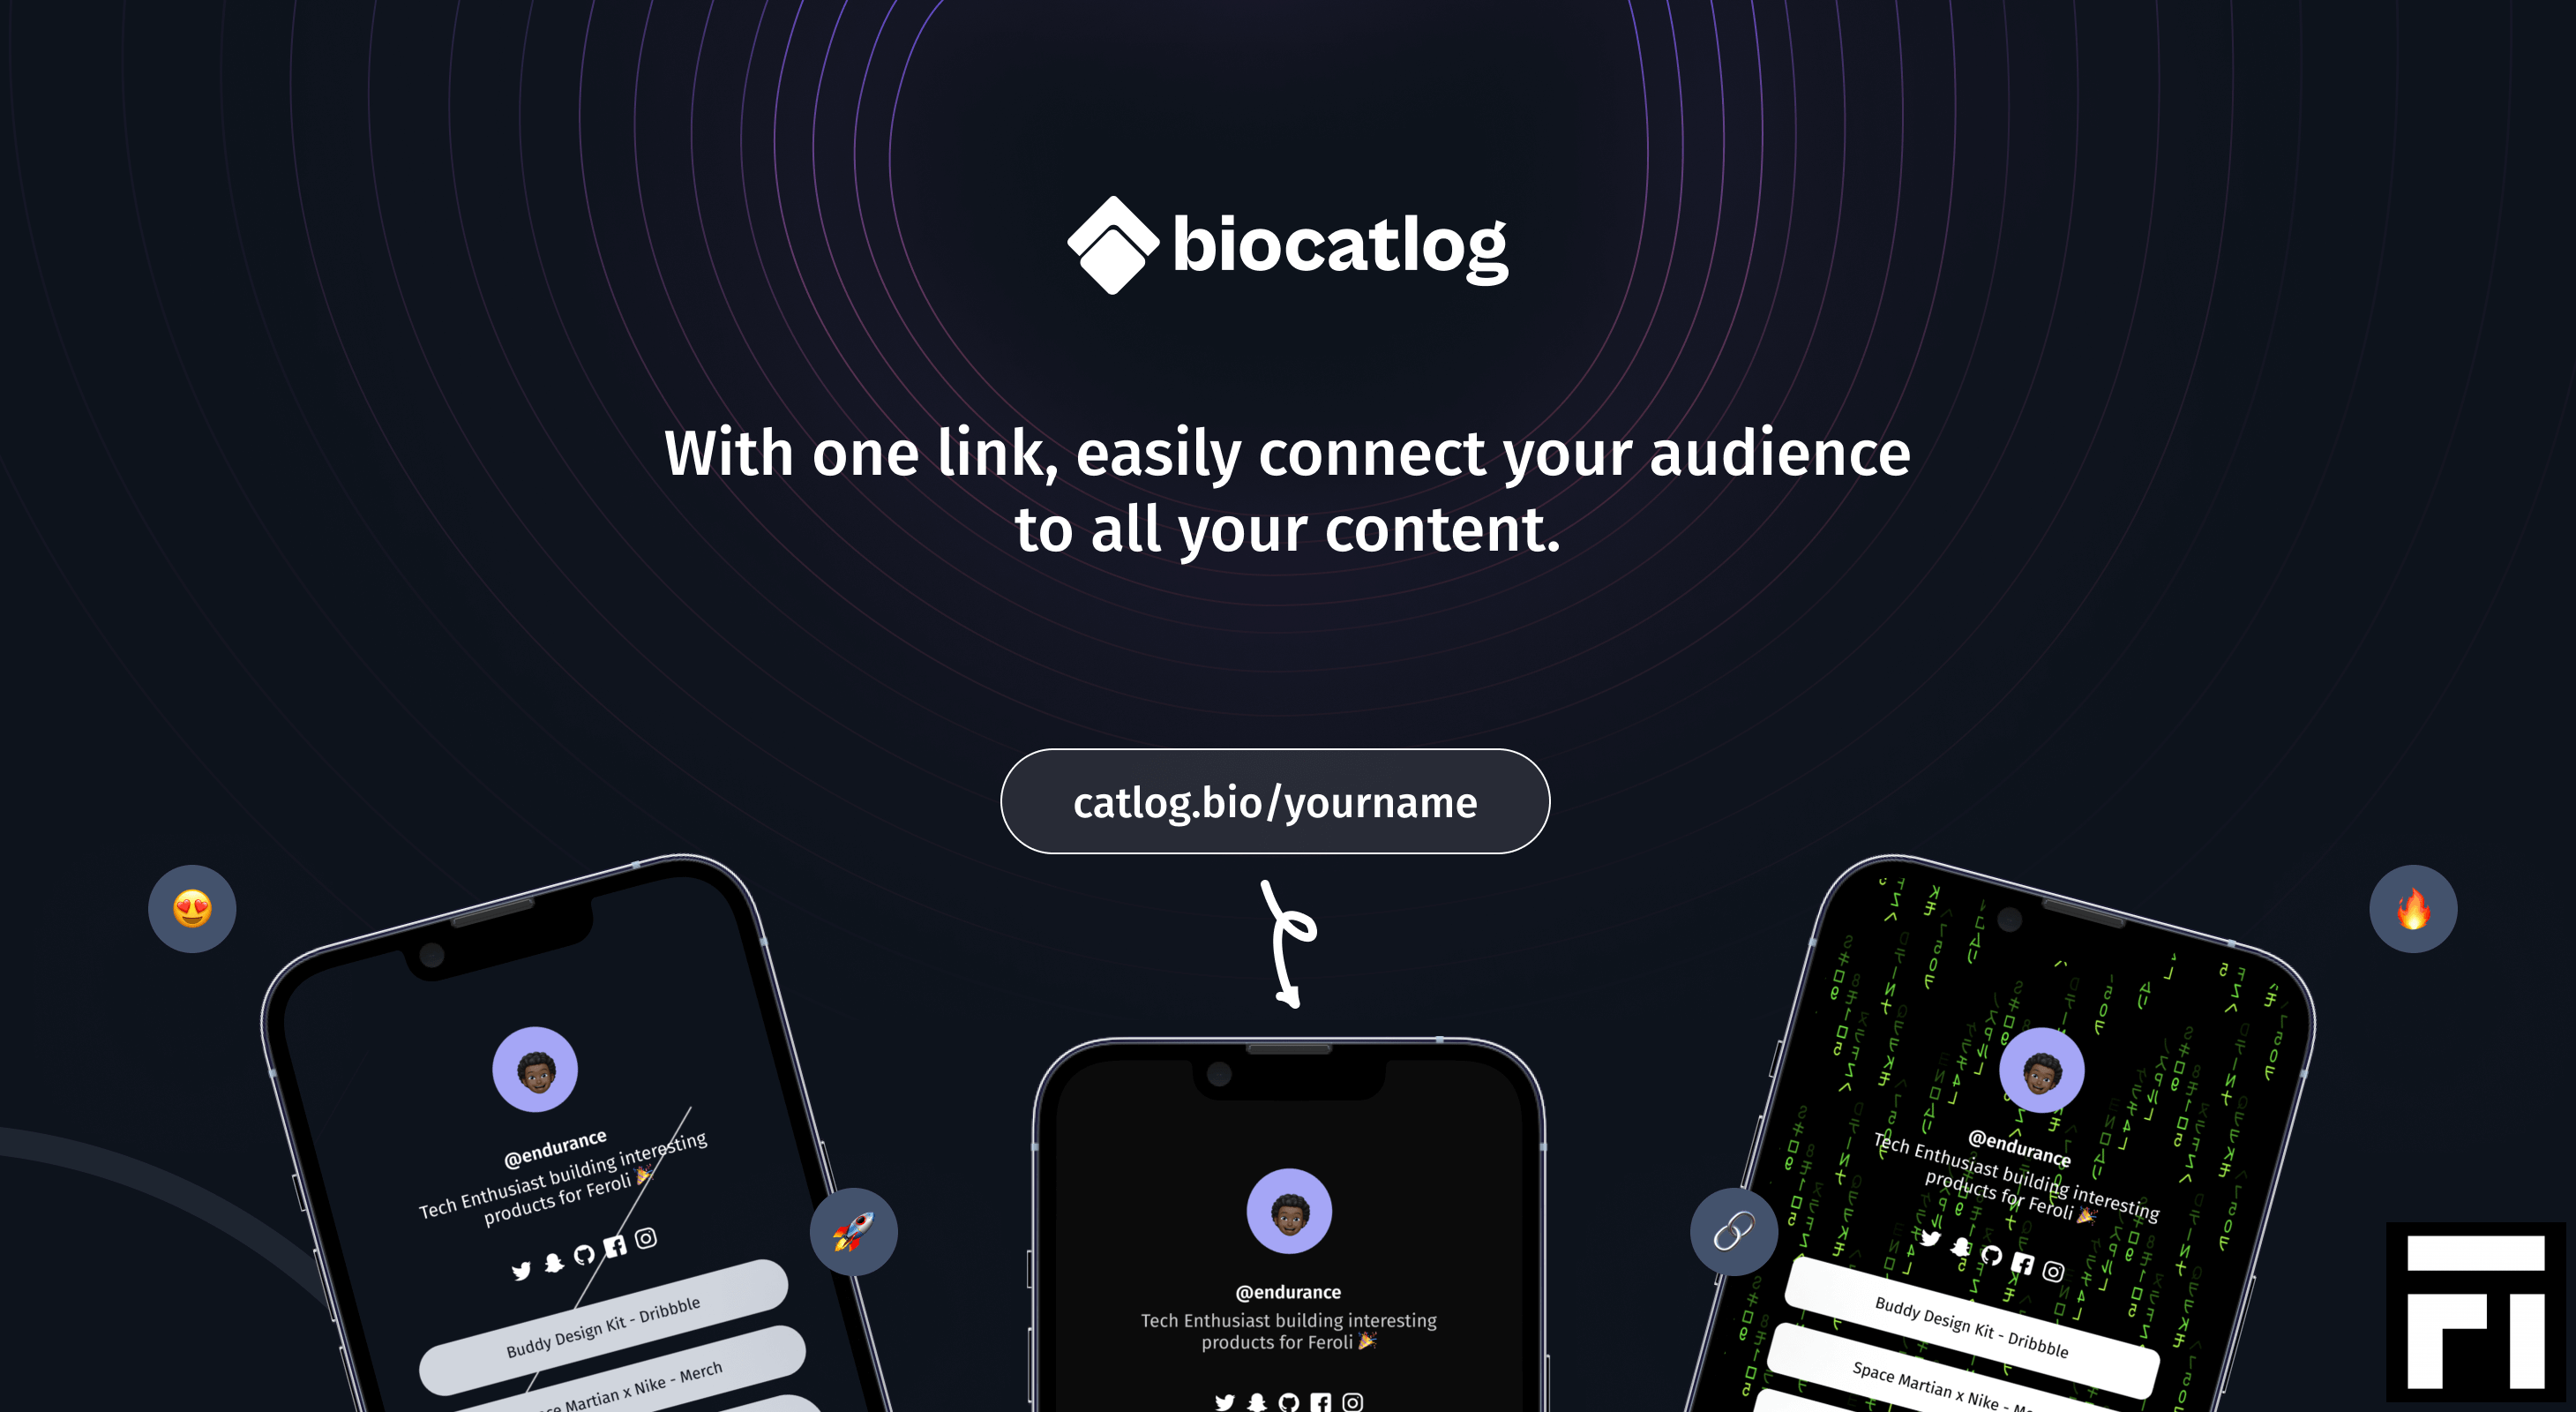 Biocatlog Allows Creators, Artists and Small Business Owners to Create Link in Bio